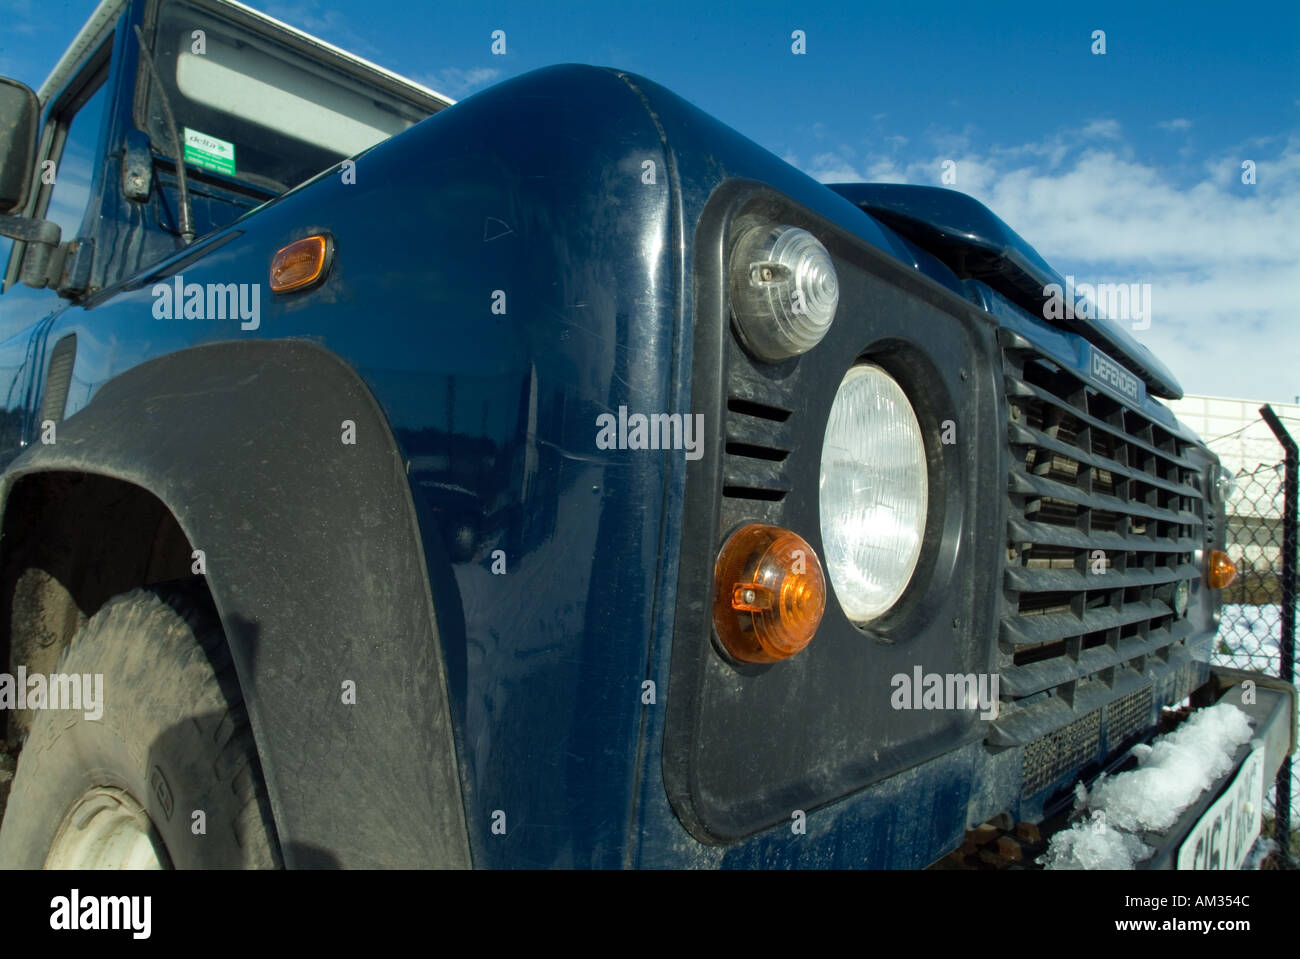 land rover in snow car suv ford motor company fomoco four english wheel drive 4 by 4 four 4X4 snow grip petrol electricity gener Stock Photo